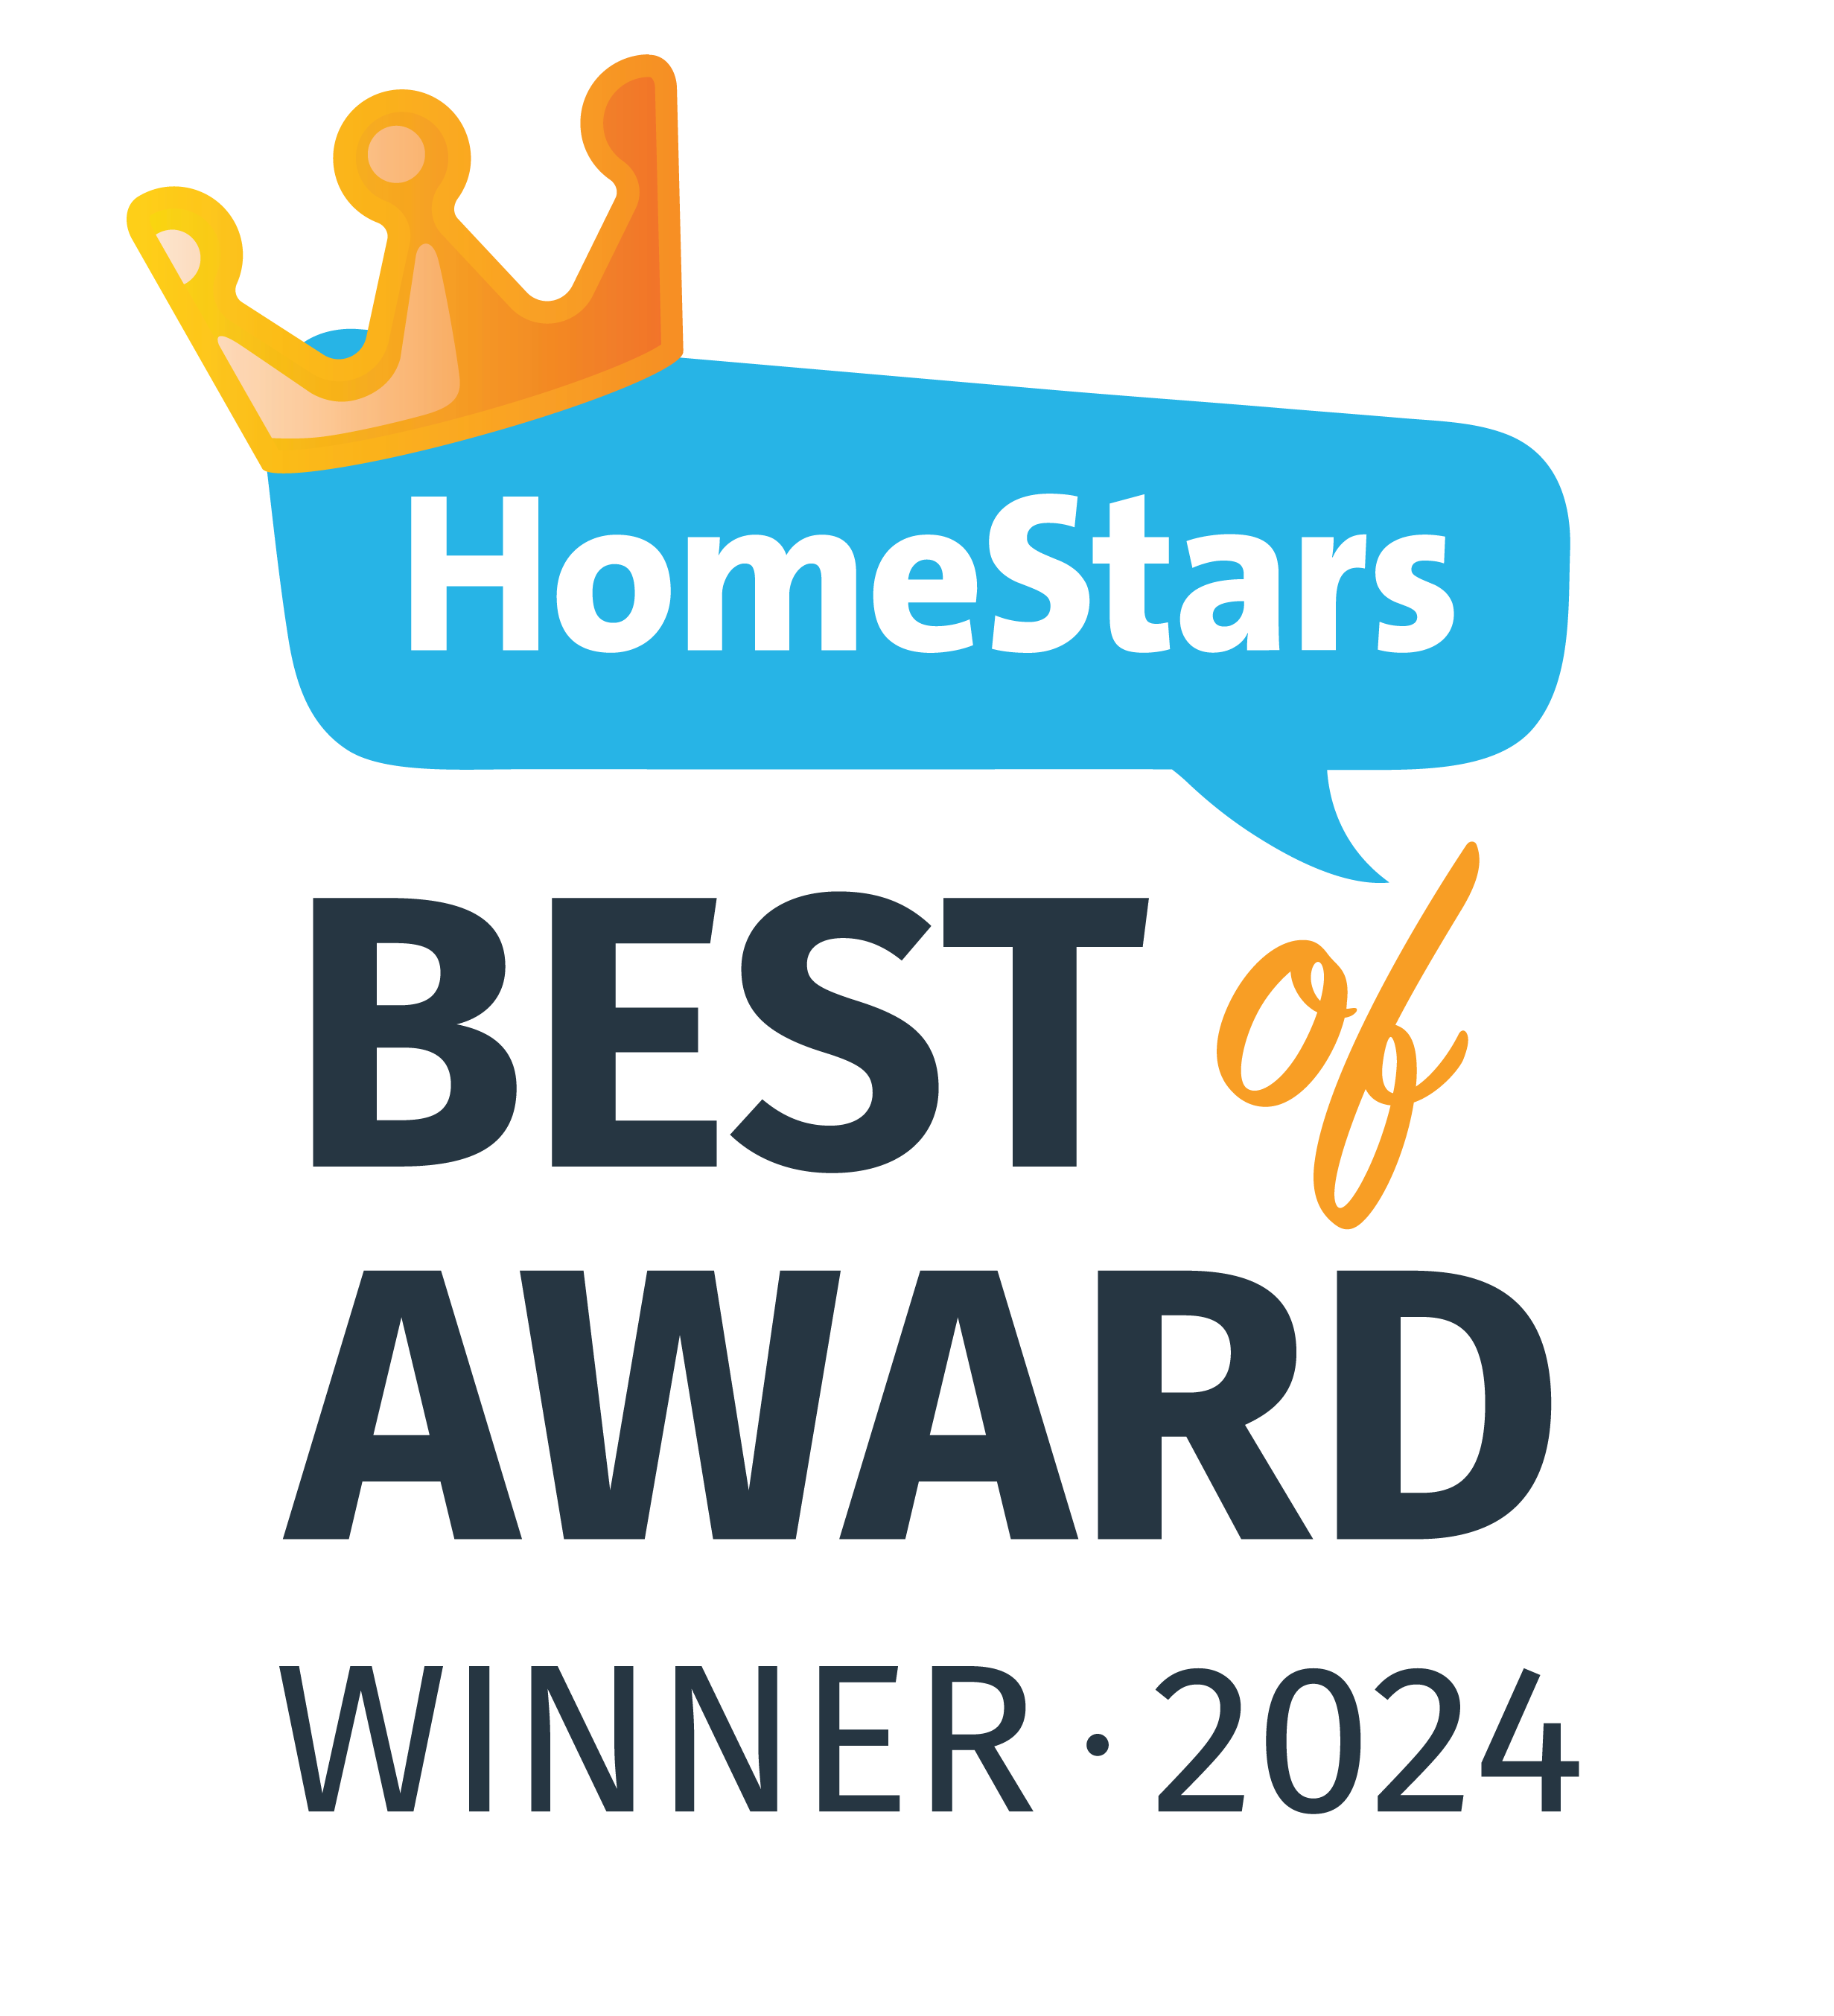 Check out Canuck Roofing's HomeStars reviews